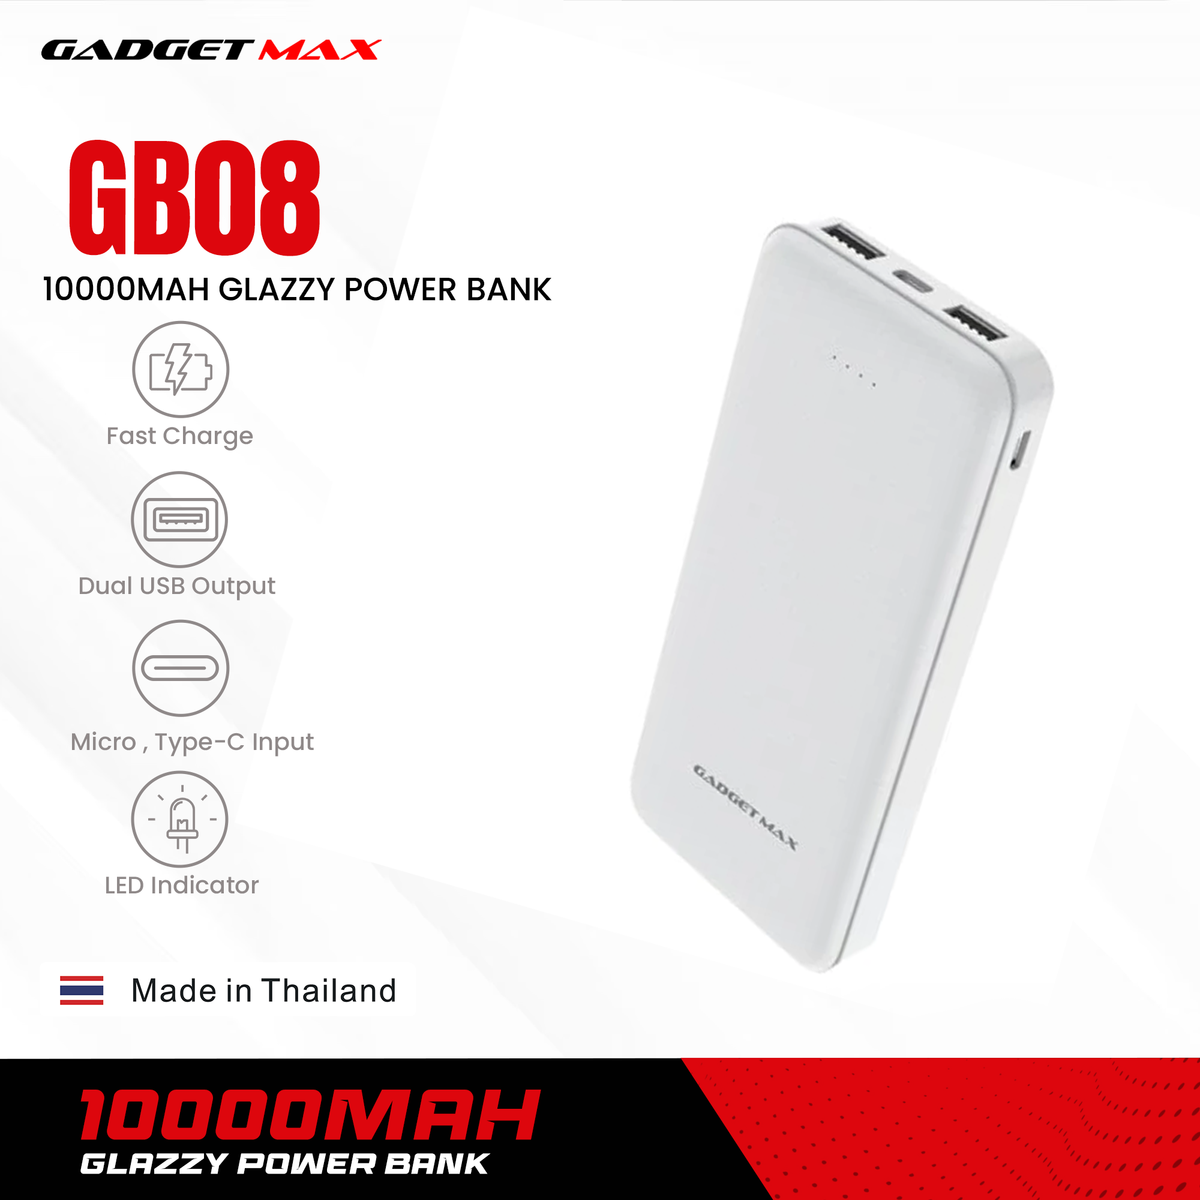 GADGET MAX GB08 10000mAh GLAZZY 2.1A  POWER BANK (5V/2.1A)|(OUTPUT-2USB/INPUT-MICRO,TYPE-C), 10000 mAh Power Bank, Android Power Bank, Power Bank for All